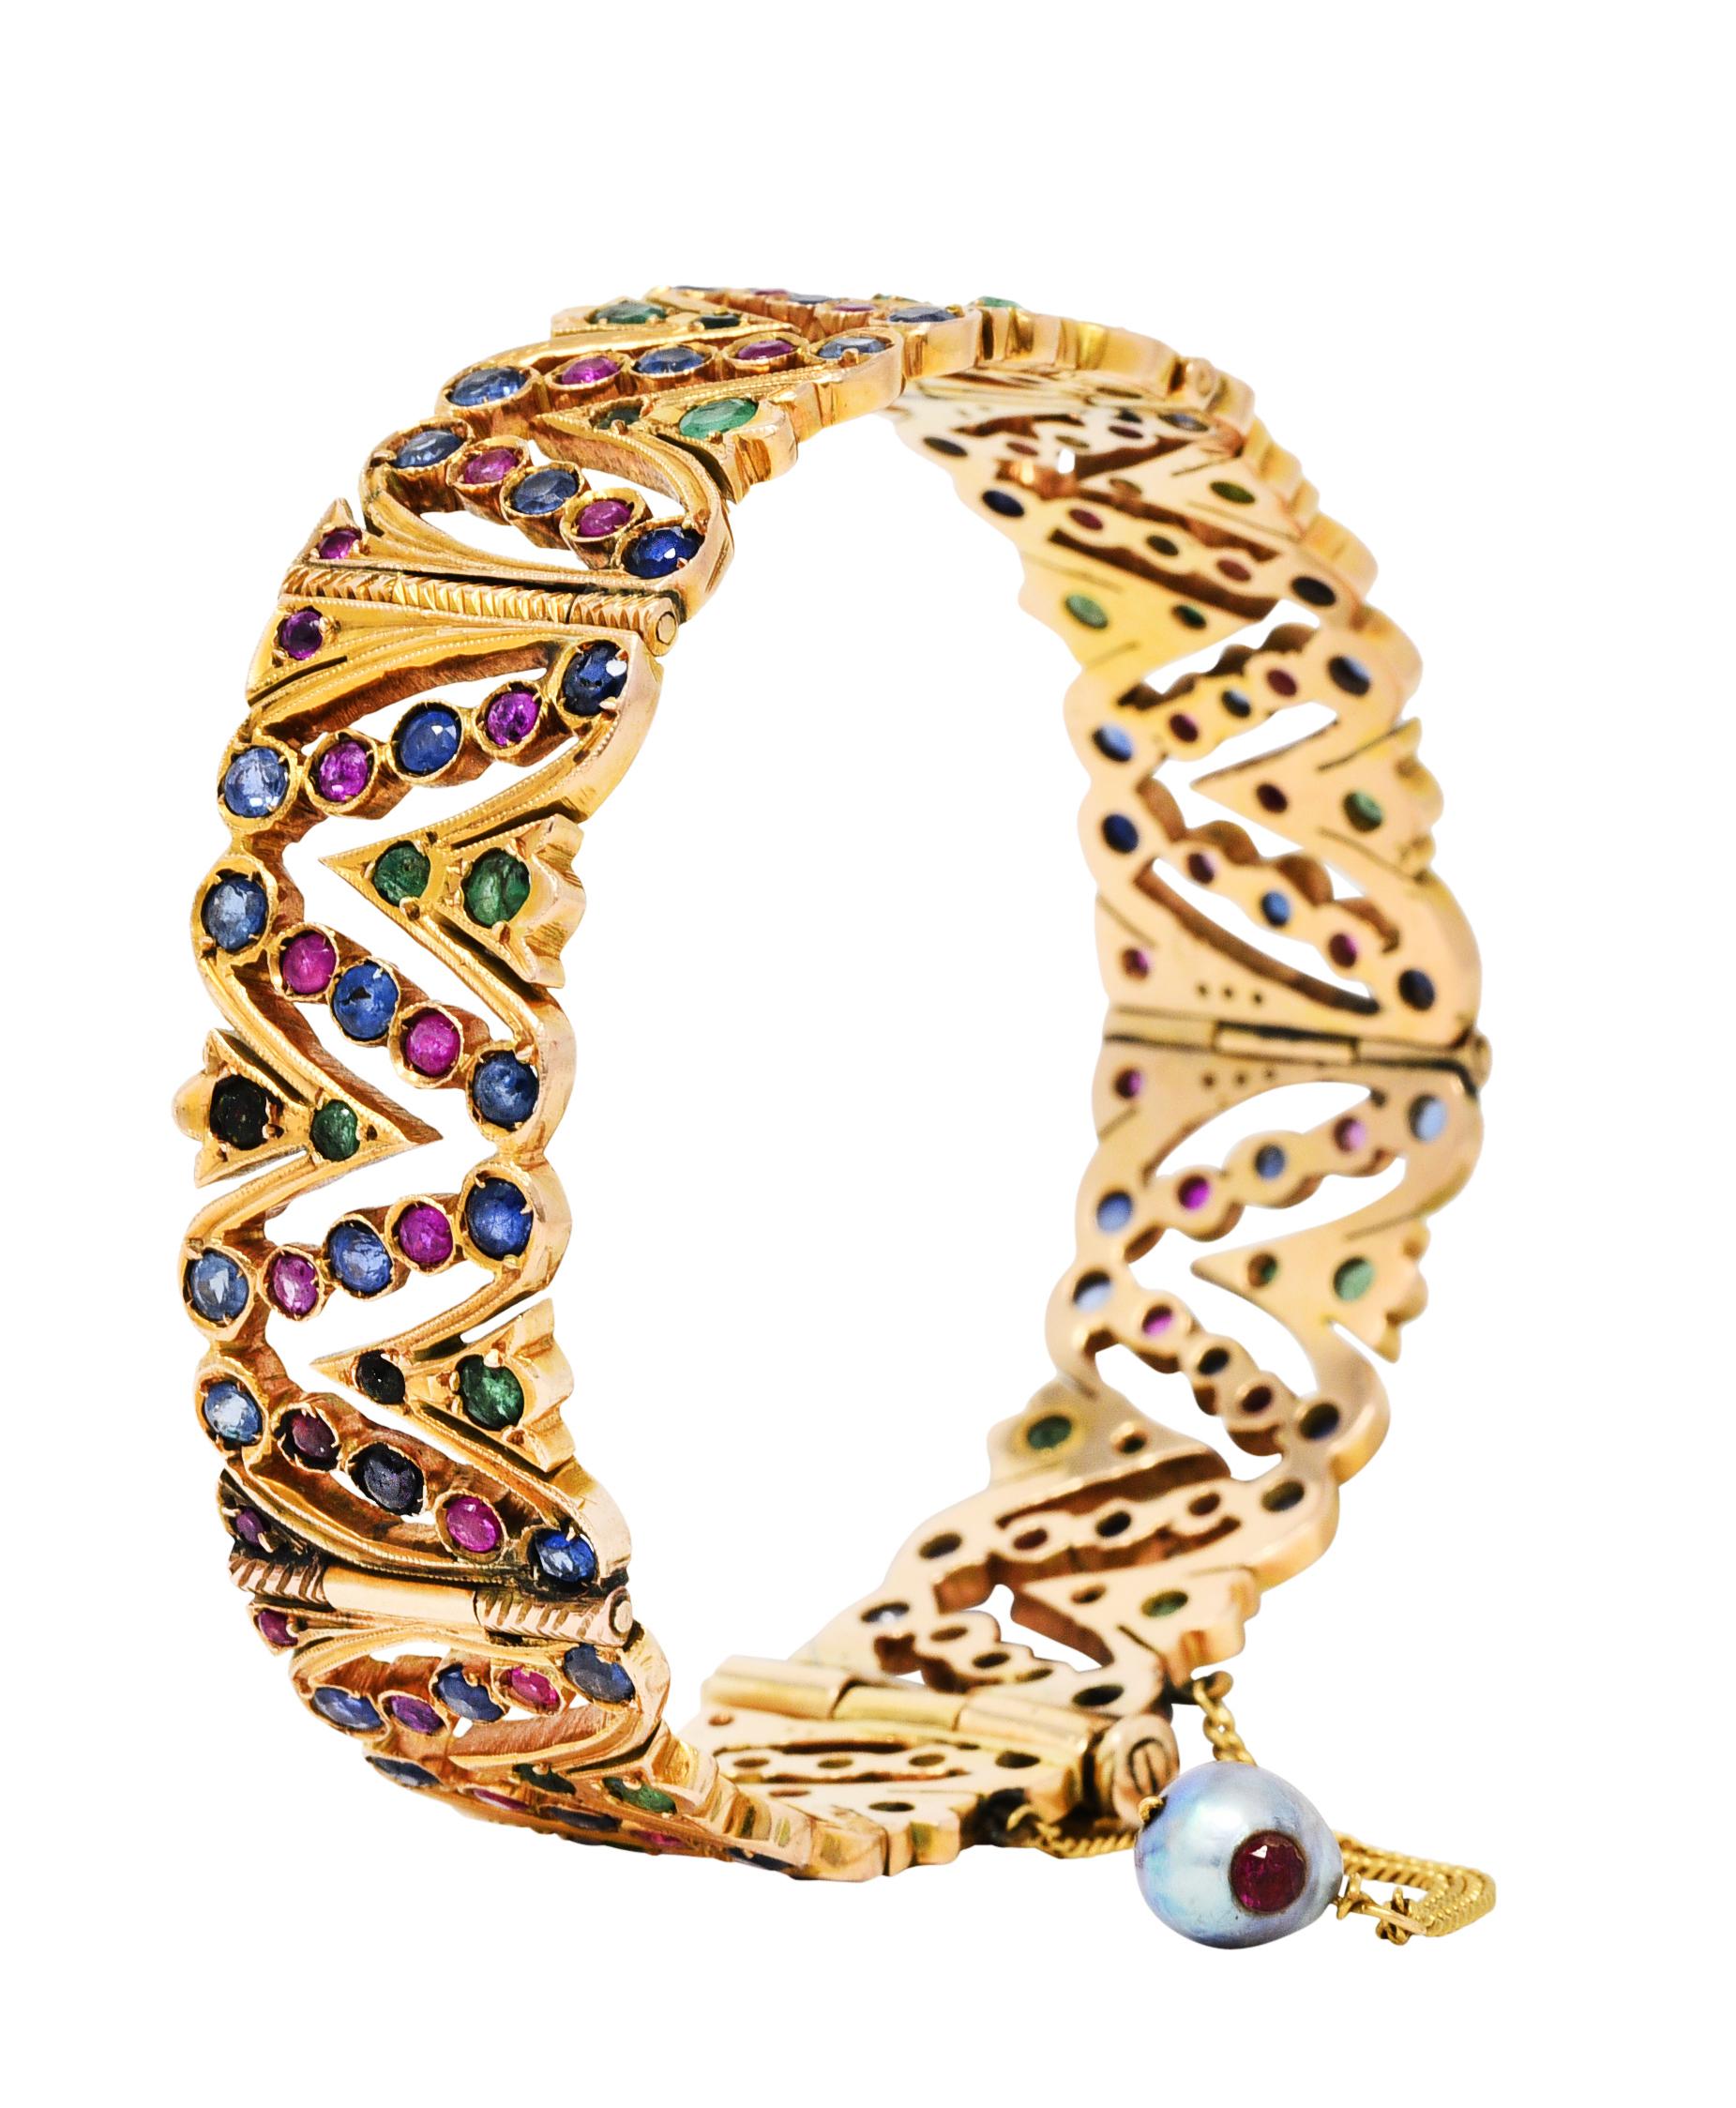 Wide bracelet comprised of hinged panel links

Pierced with stylized foliate accented by milgrain and ribbed texture

Accented throughout by round cut emeralds, rubies, and sapphires

Rubies are translucent with natural inclusions while weighing